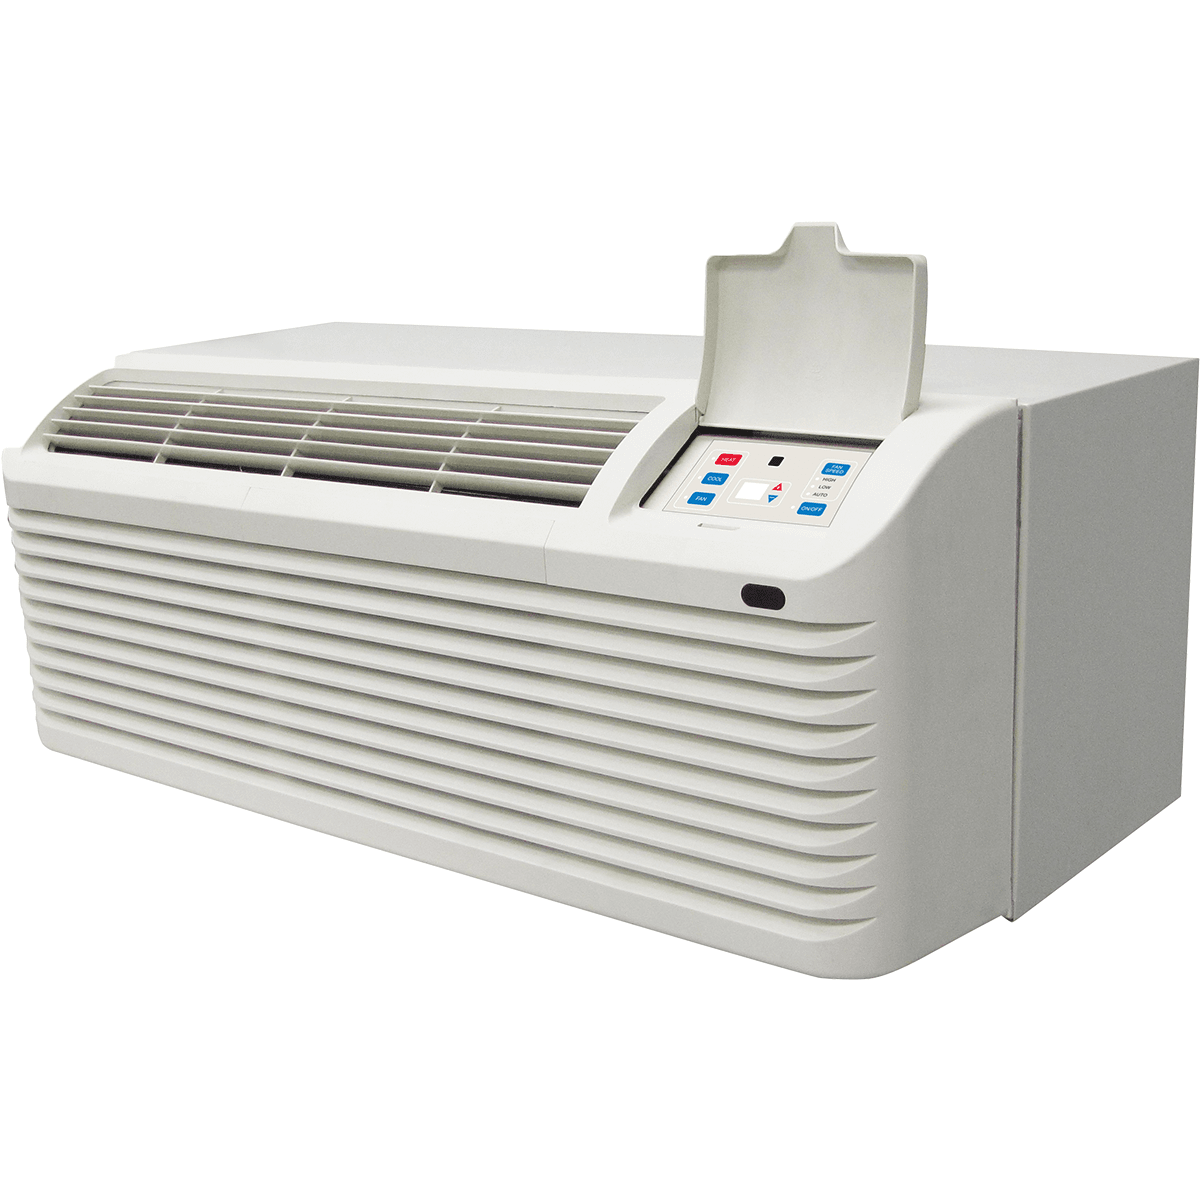 Comfort-aire 15,000 Btu Packaged Terminal Air Conditioner And Heater